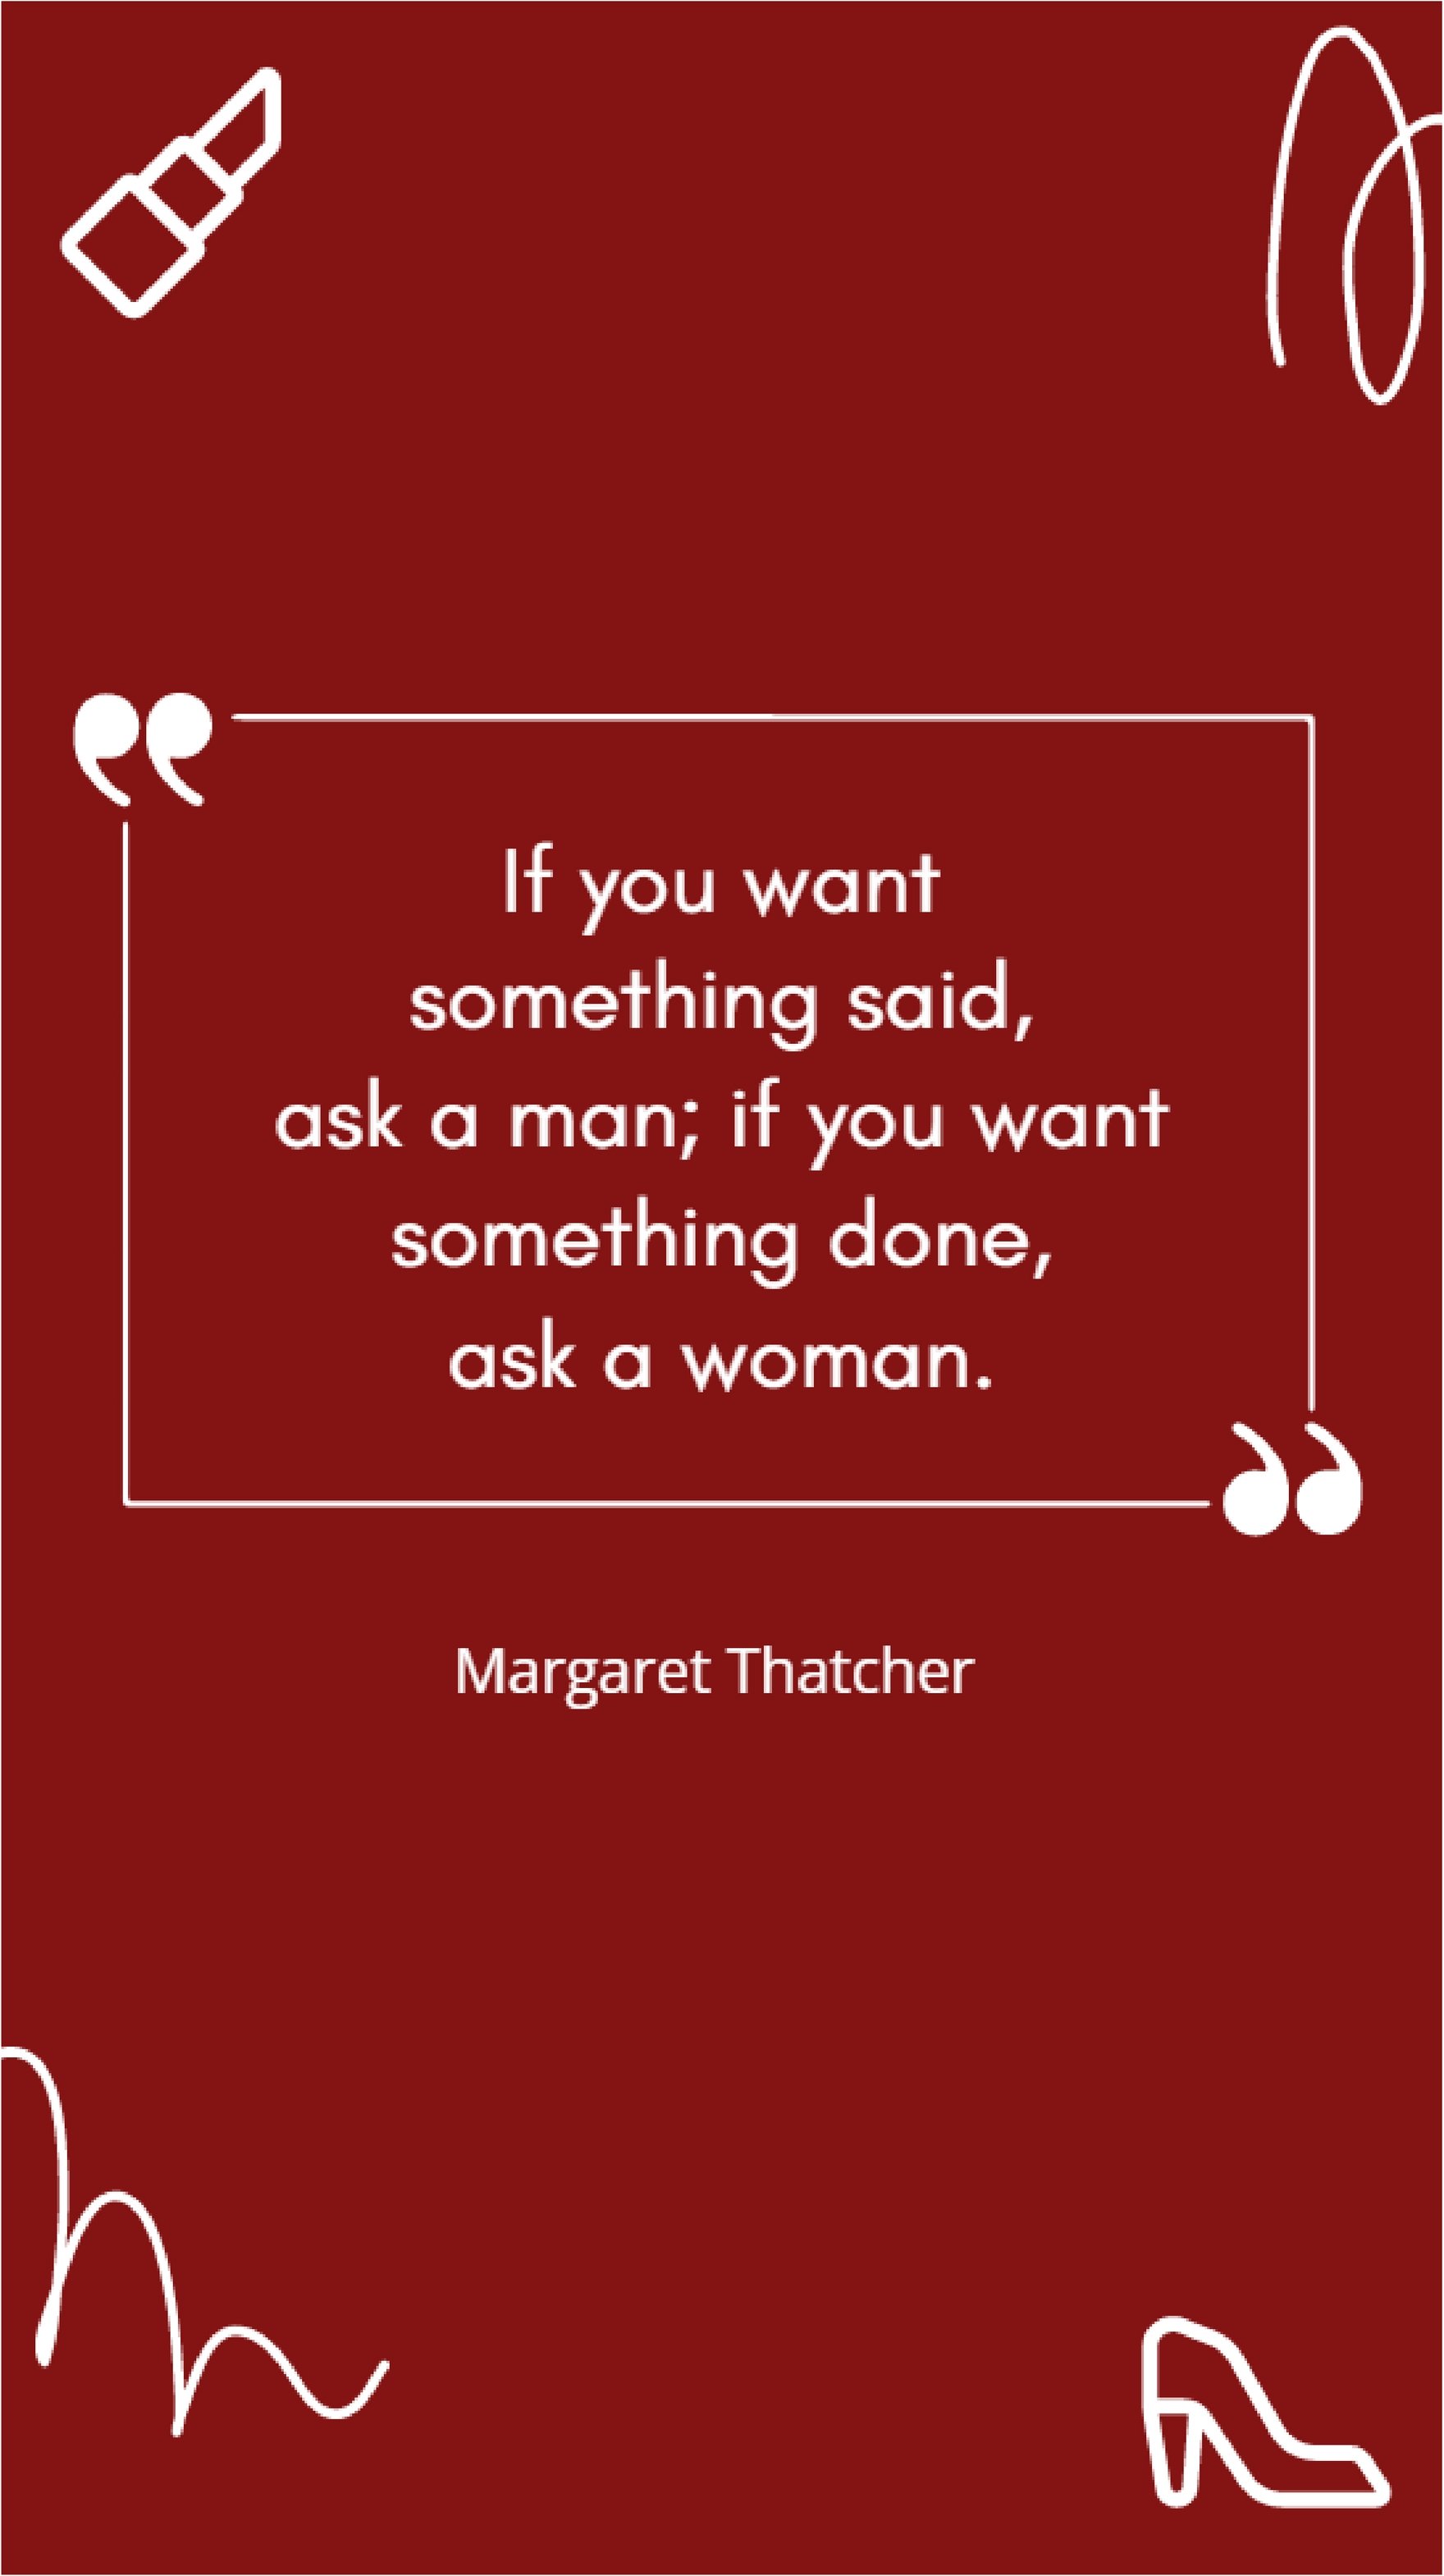 Margaret Thatcher - “If you want something said, ask a man; if you want something done, ask a woman."